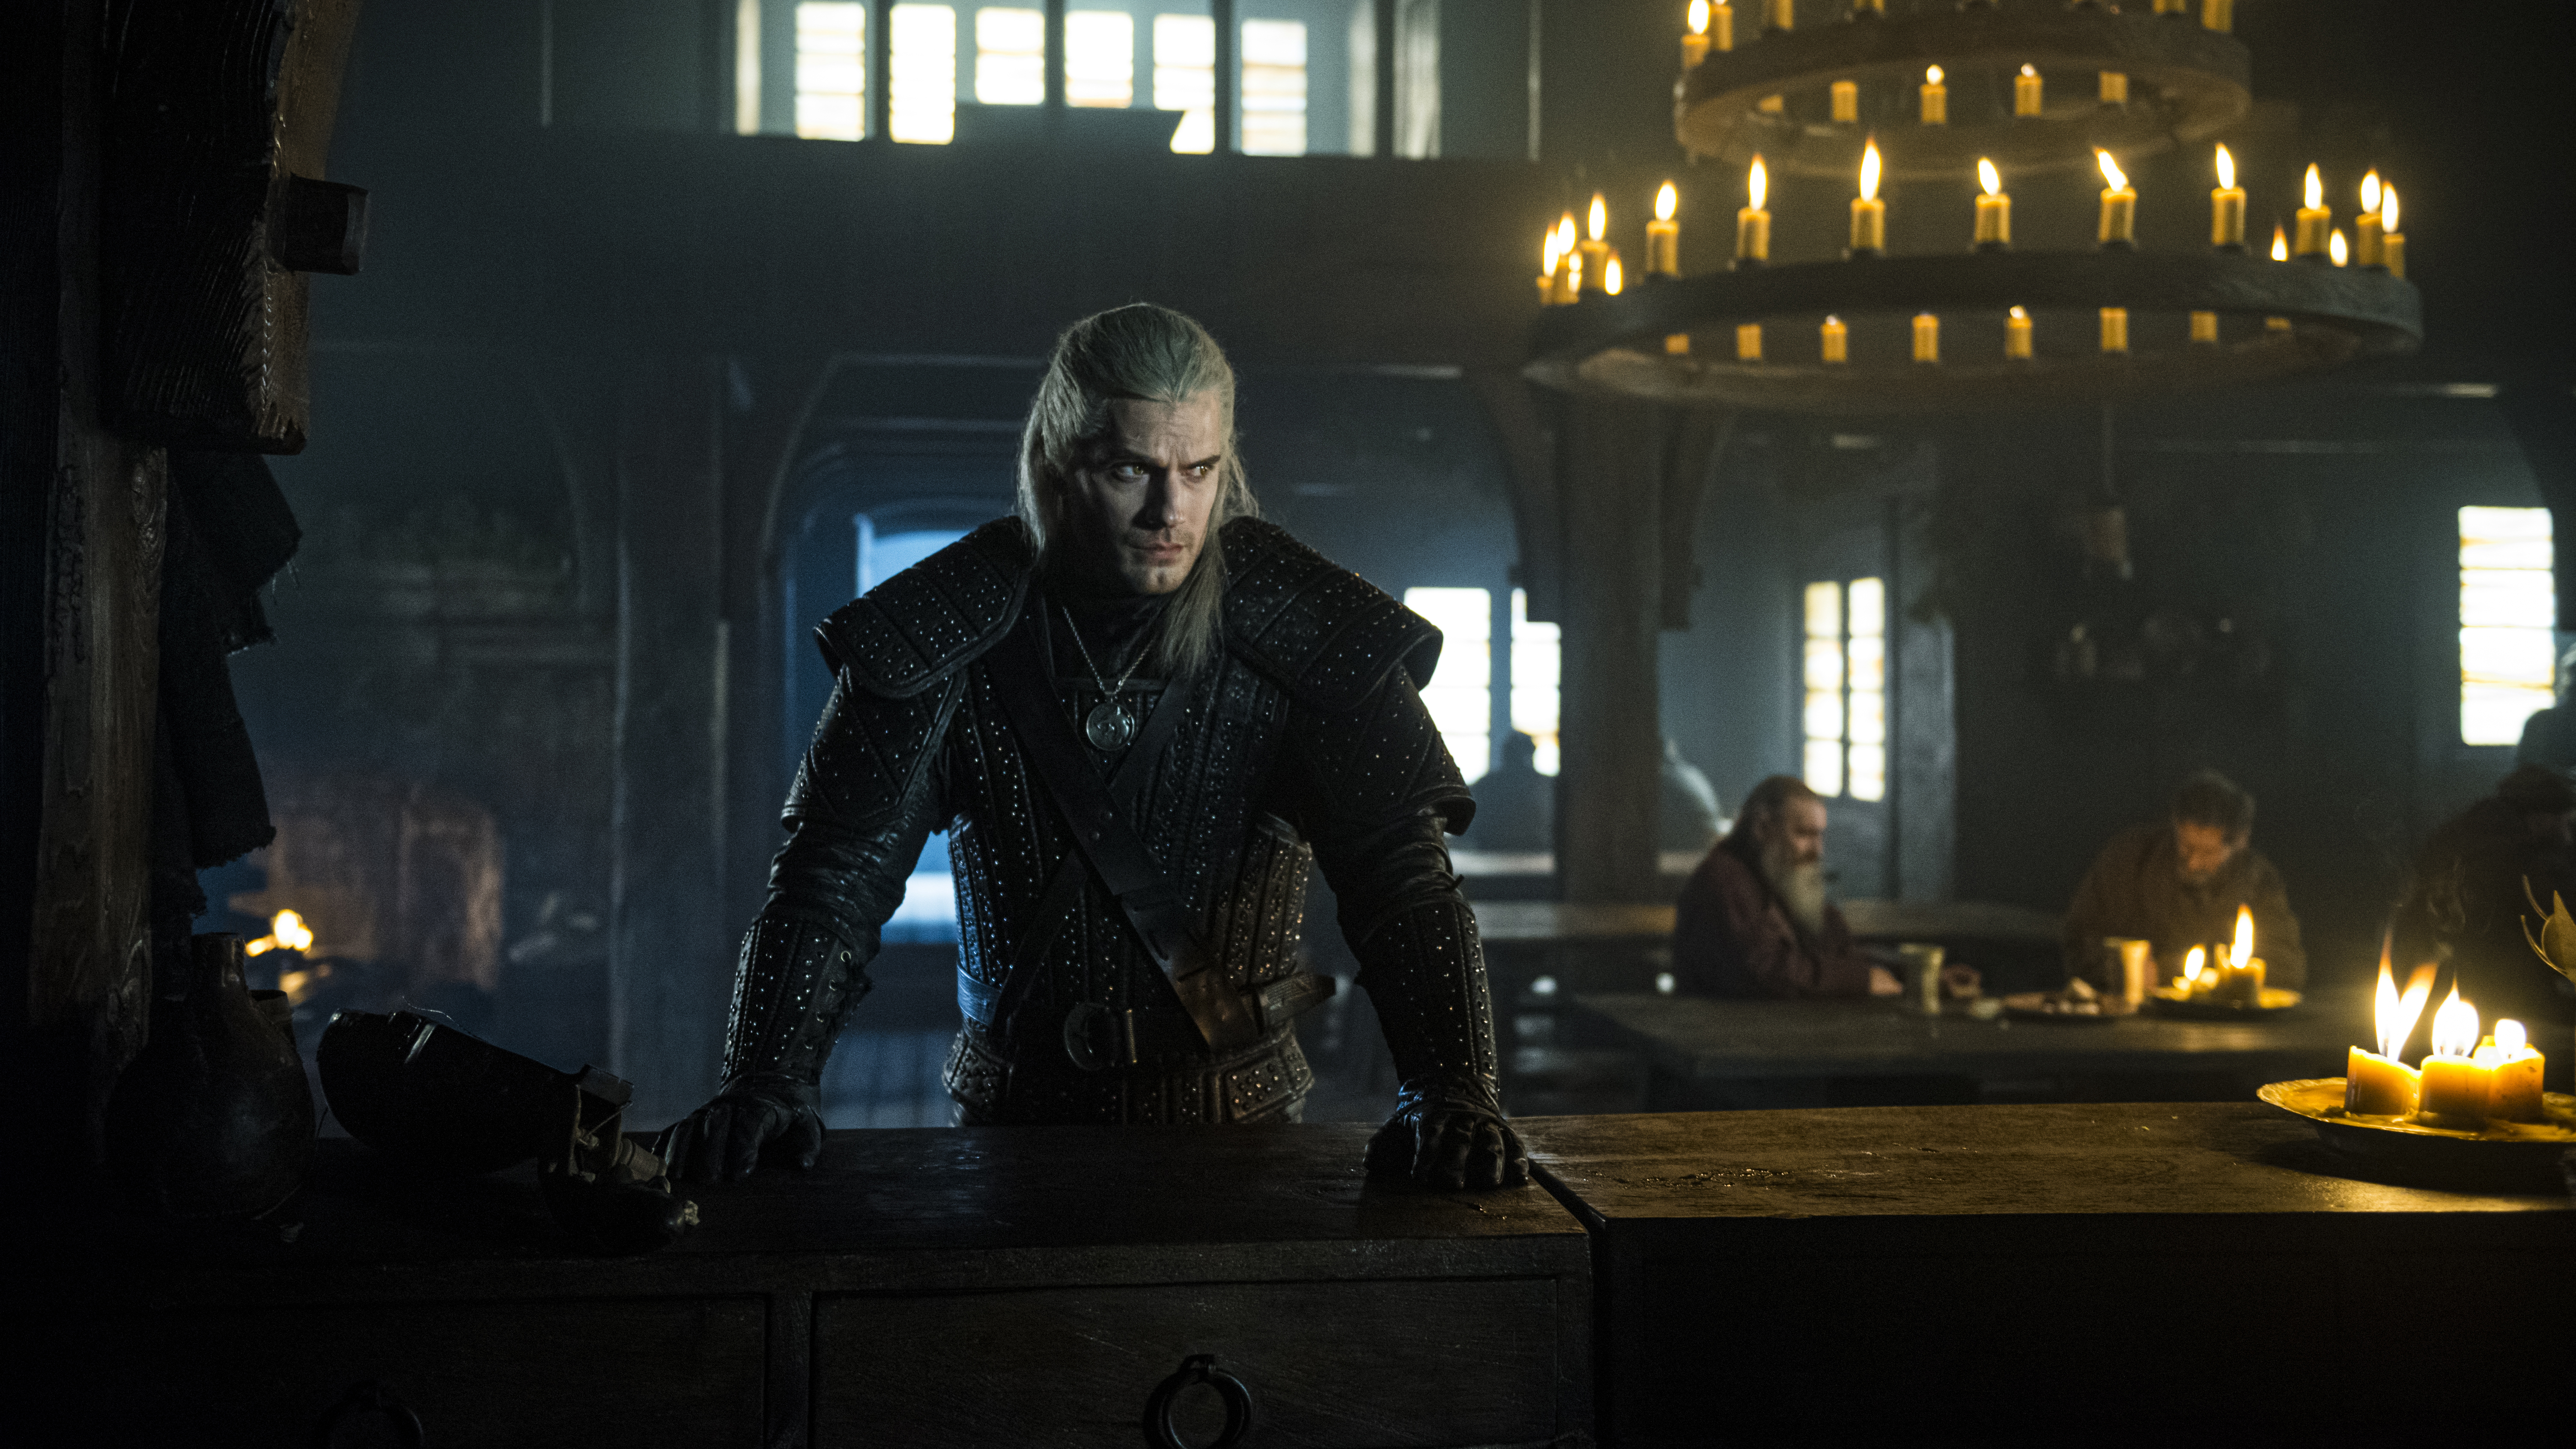 The Witcher is on track to be Netflix’s biggest TV series of all-time